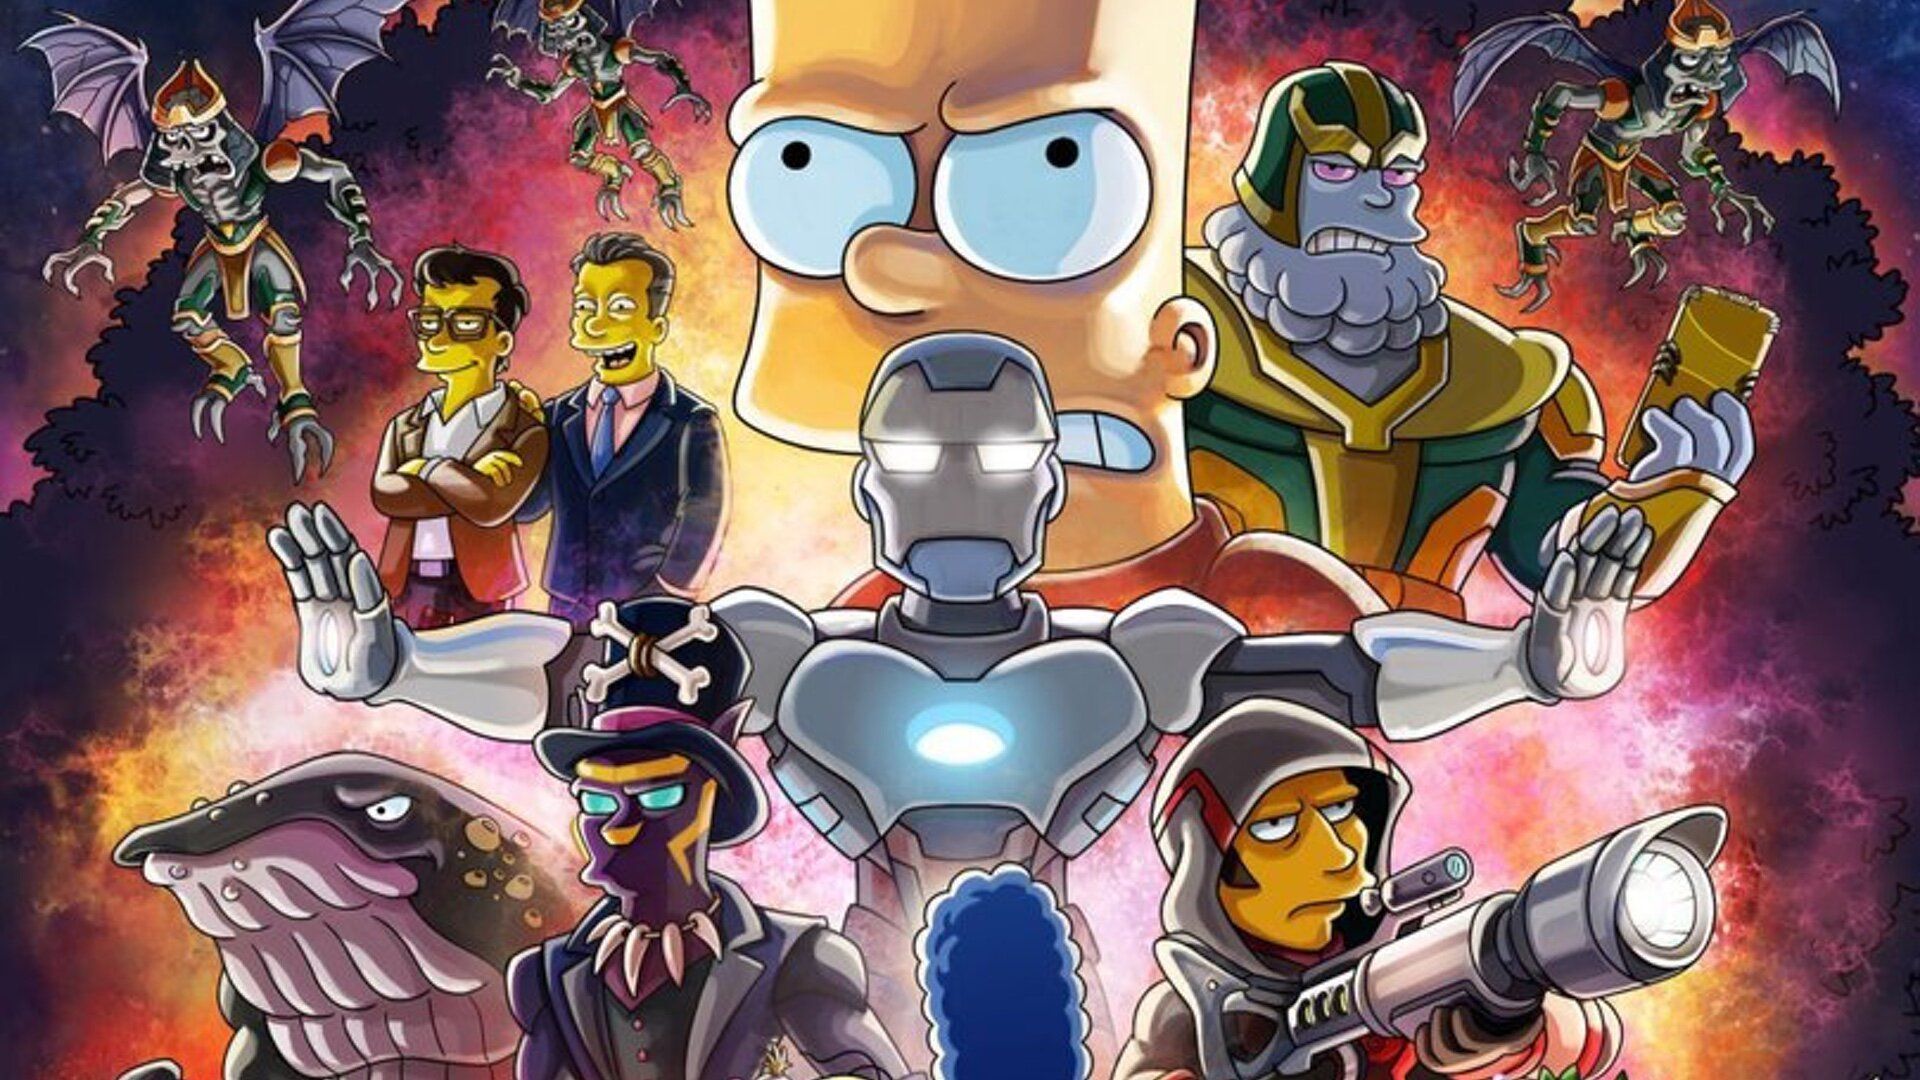 Poster And Image For Fox's AVENGERS Inspired SIMPSONS Episode Bart The Bad Guy